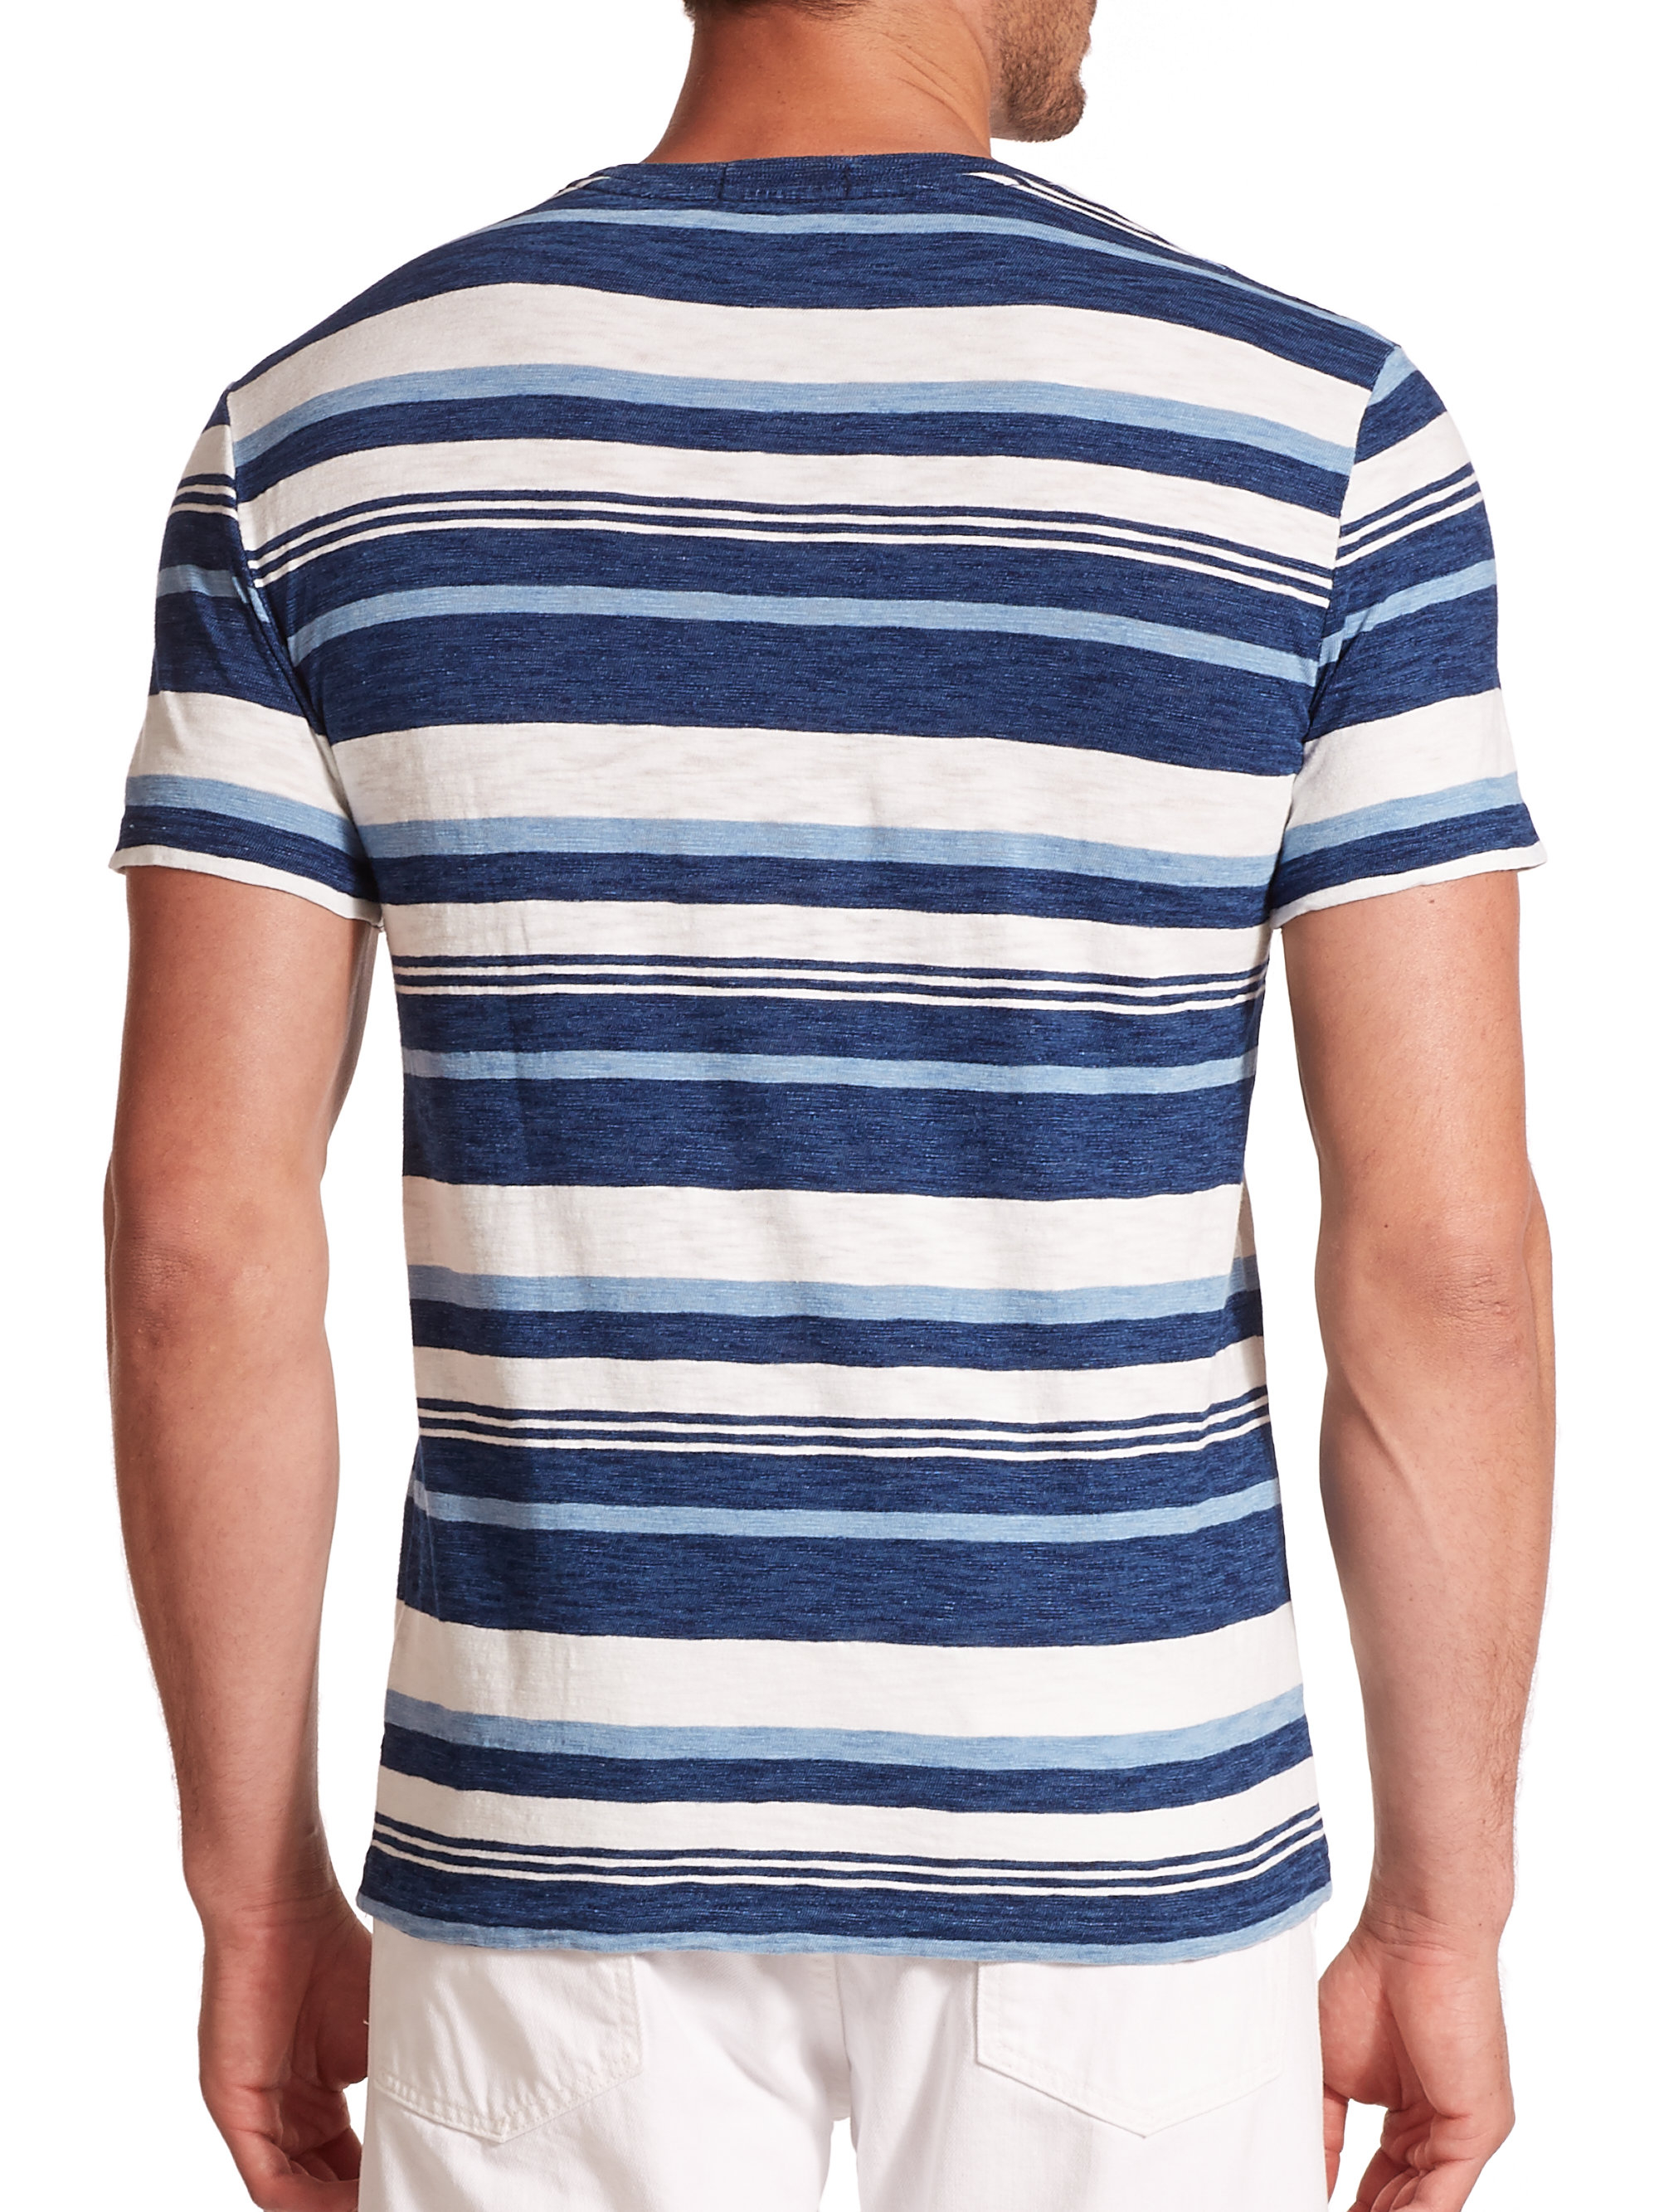 Lyst - Polo Ralph Lauren Striped Cotton Jersey Tee in Blue for Men